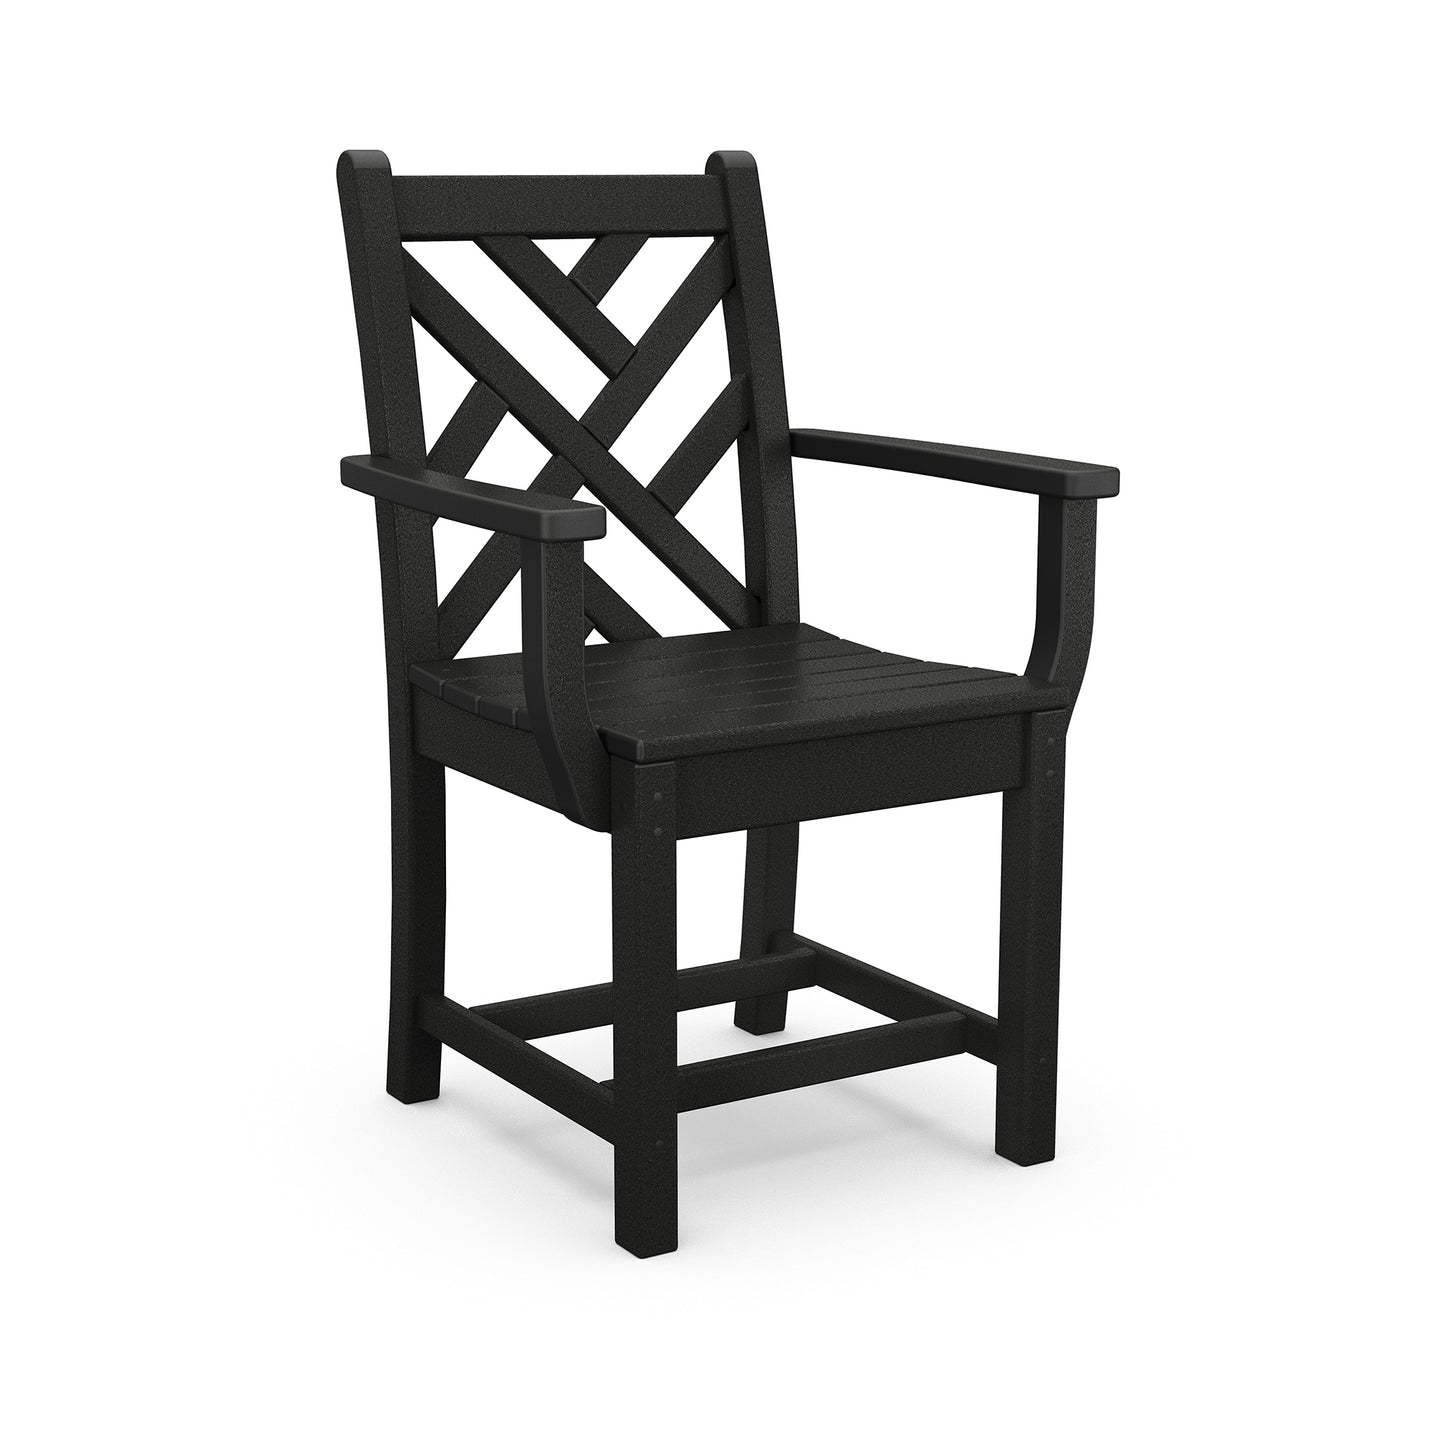 A black POLYWOOD Chippendale Outdoor Dining Arm Chair with a crisscross design on the backrest and armrests, displayed against a plain white background.